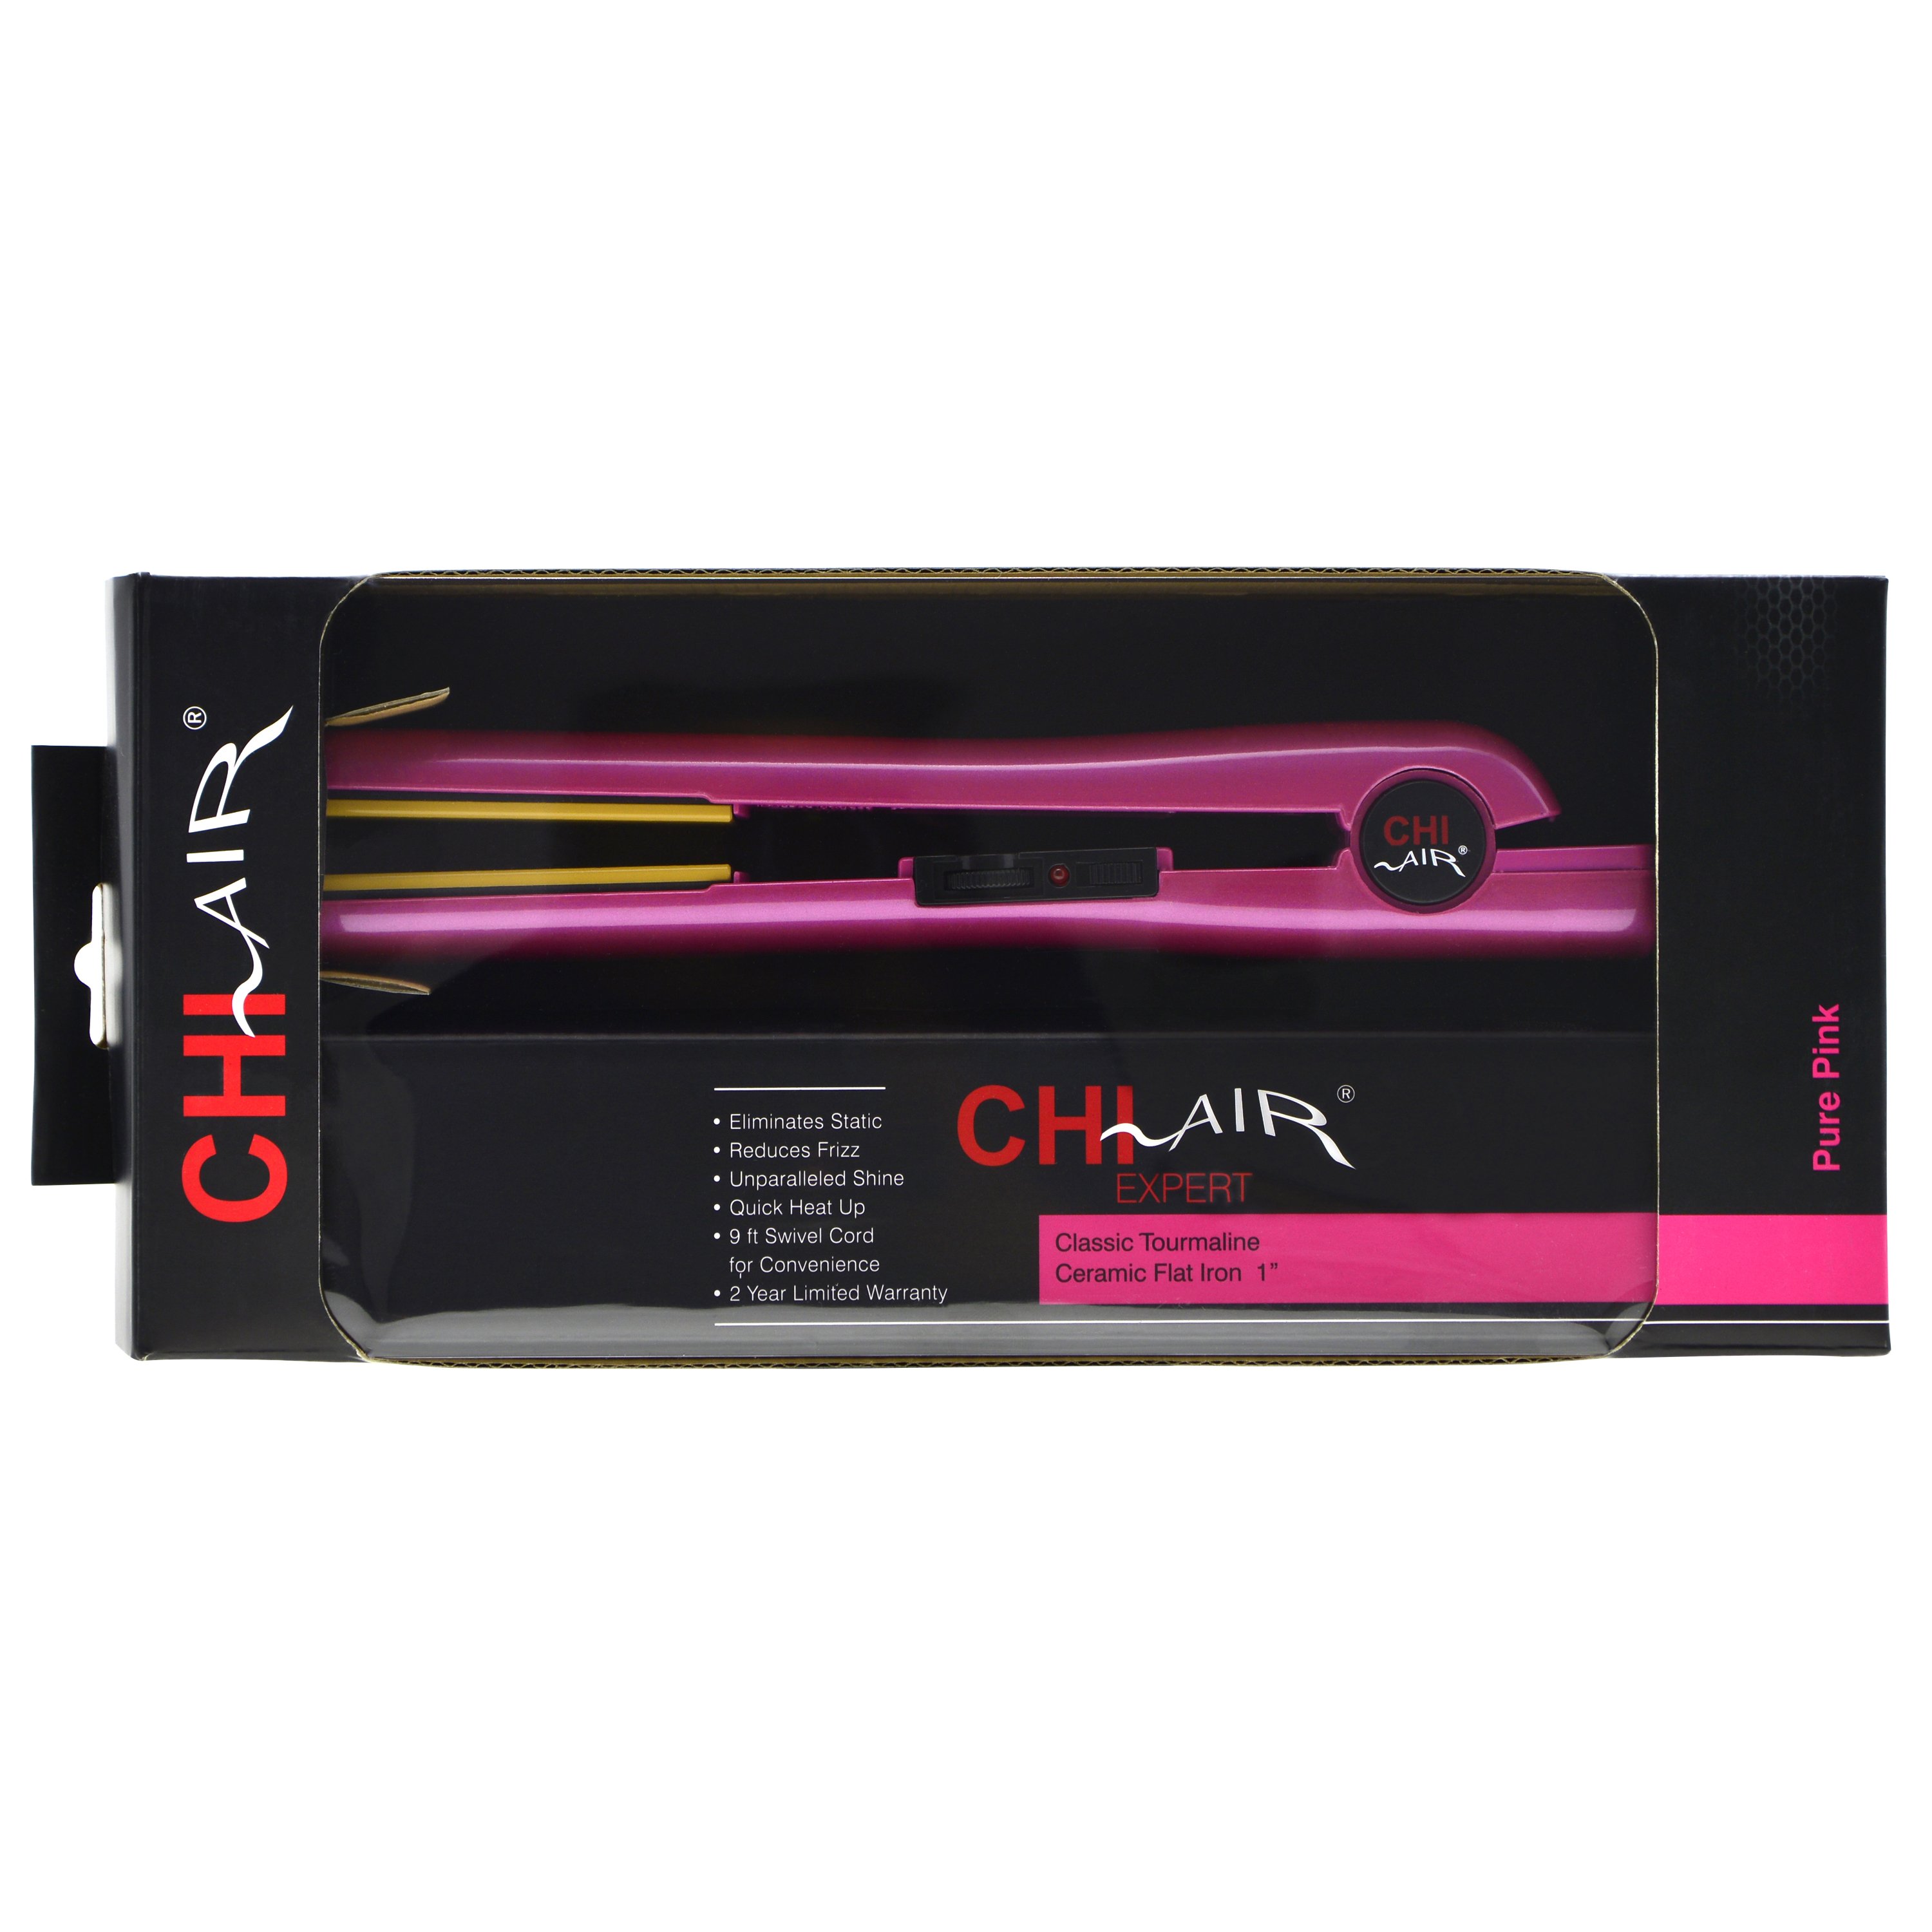 CHI Air Pure Pink Classic 1 Inch Iron - Shop Curling & Flat Irons at H-E-B